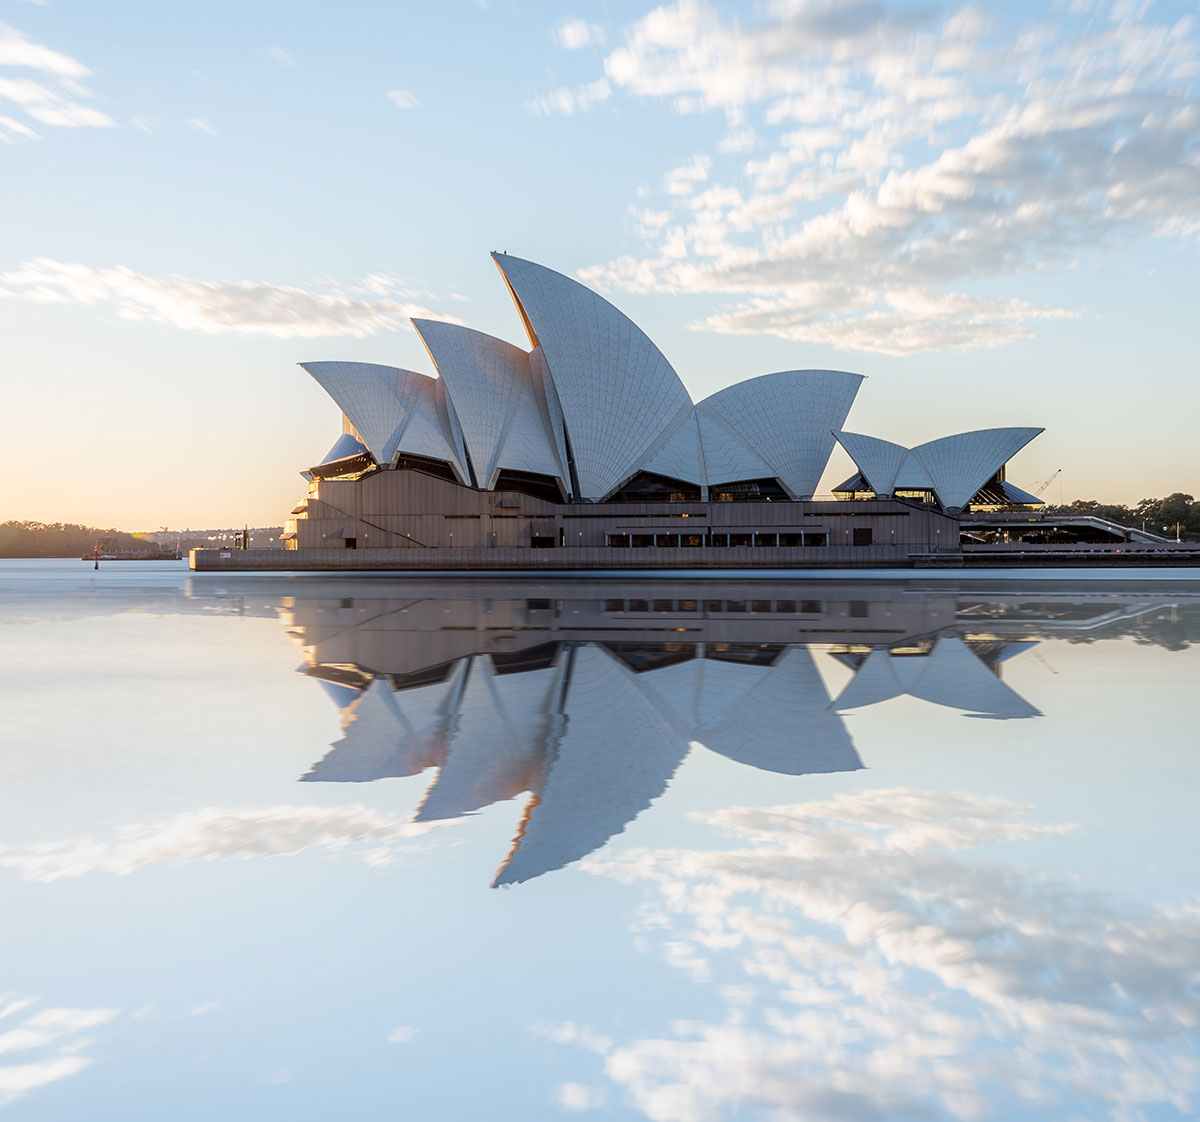 The Sydney Opera House reflecting in the still water of the harbor.